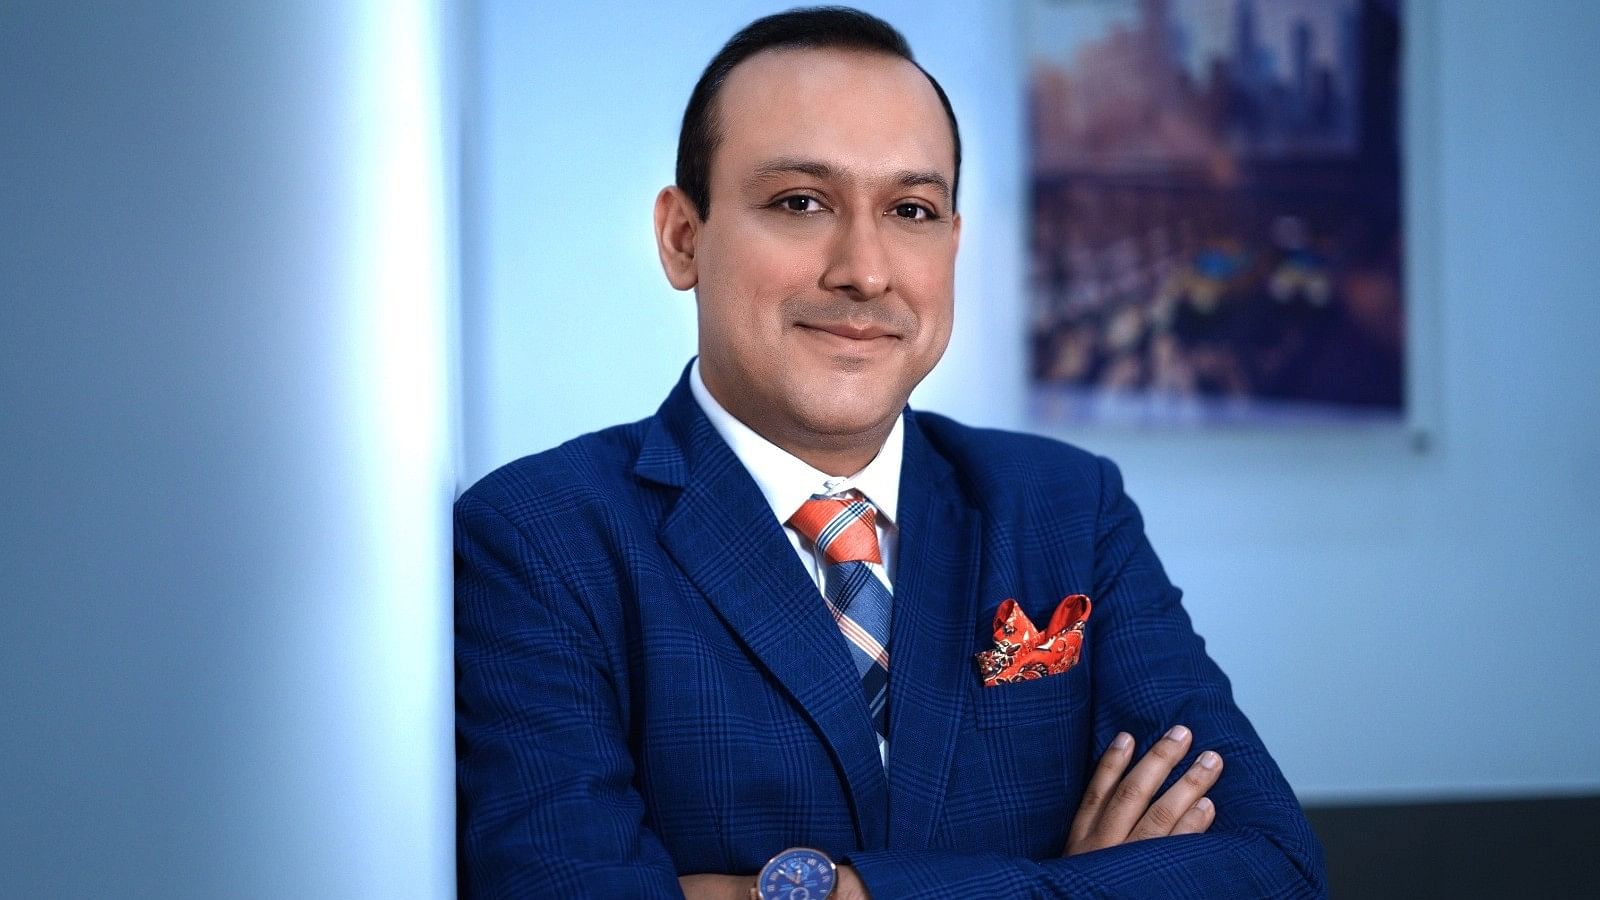 Salil Nath, General Manager - Indian Subcontinent, Etihad Airways